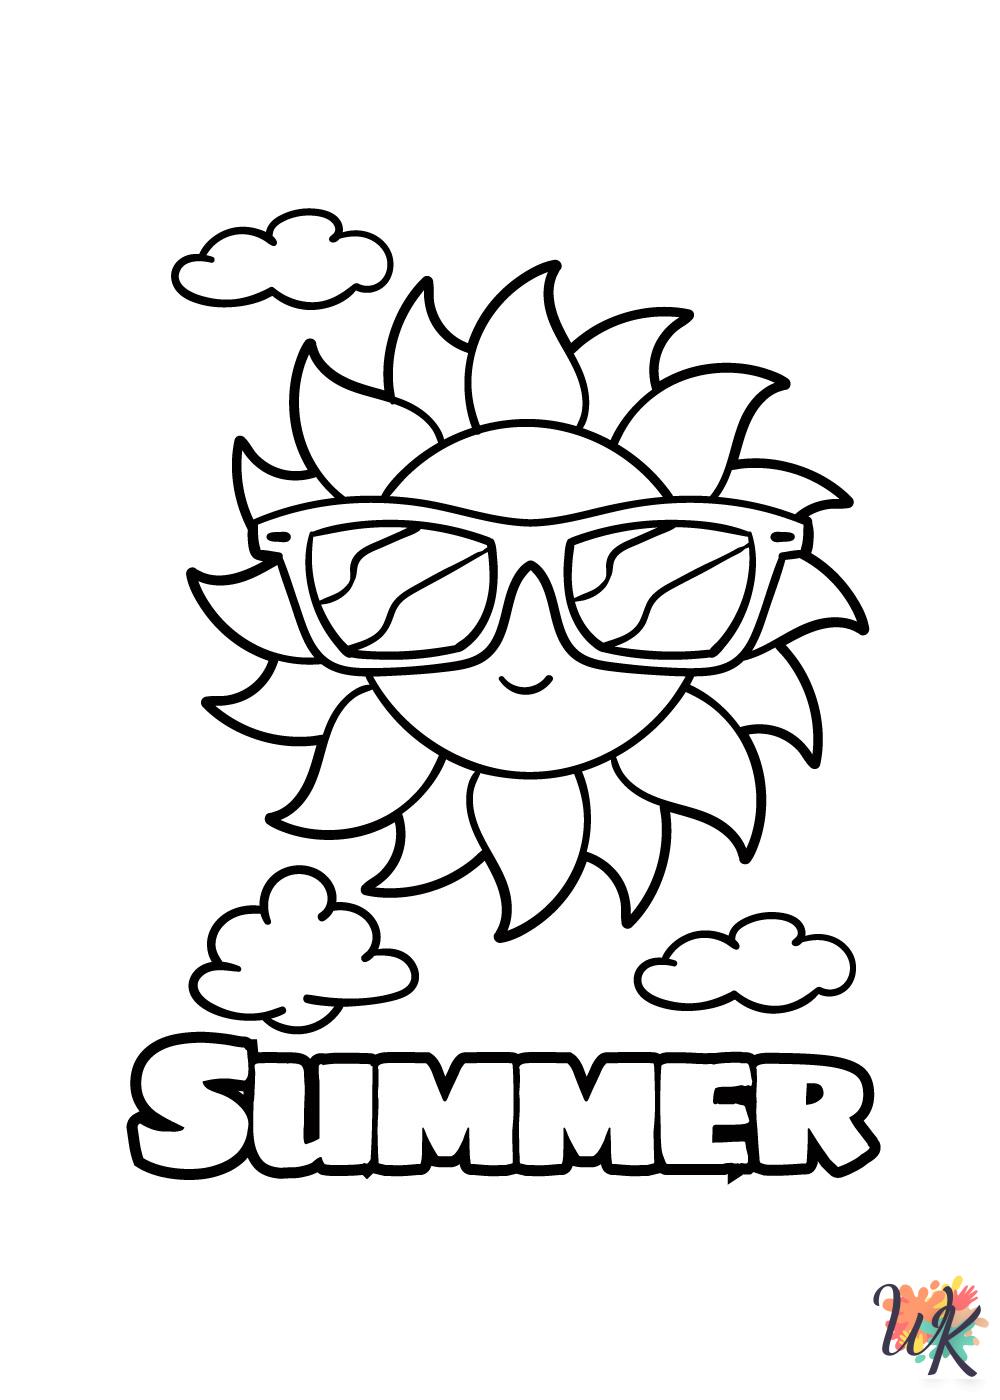 Summer coloring pages printable free